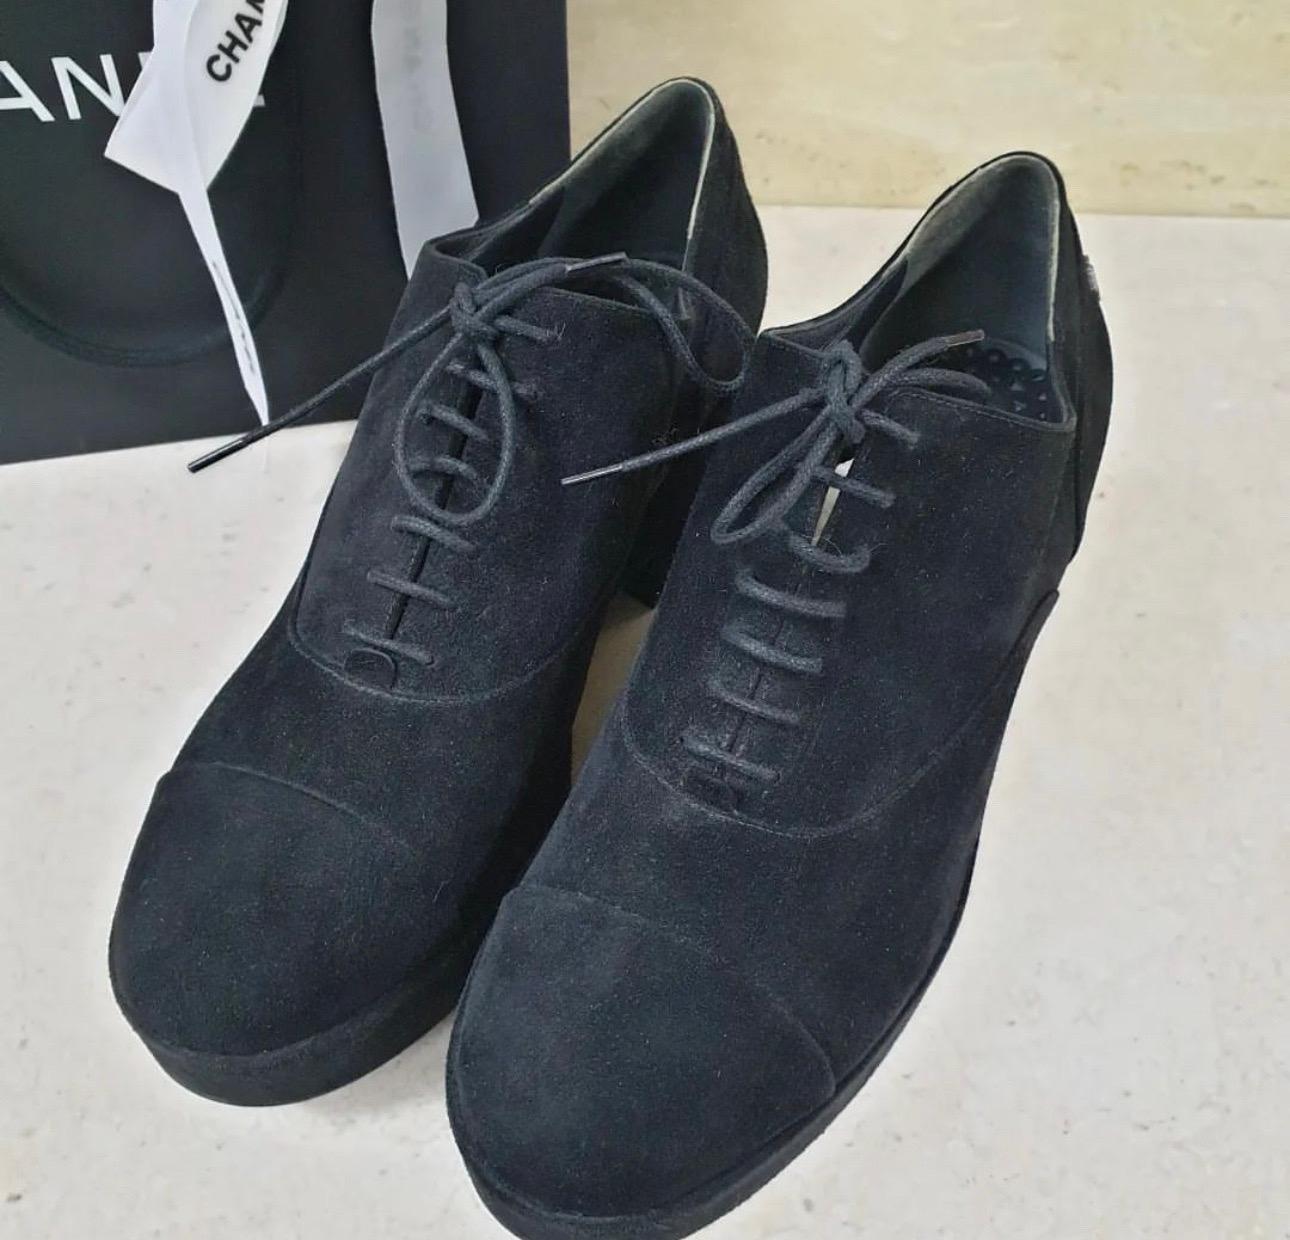 These gorgeous black oxfords from Chanel are all you need to make heads turn! They are crafted from soft suede and feature round toes, cap toes, high block heels and solid platforms that offer maximum grip while walking. 
Sz.40,5
Condition is never